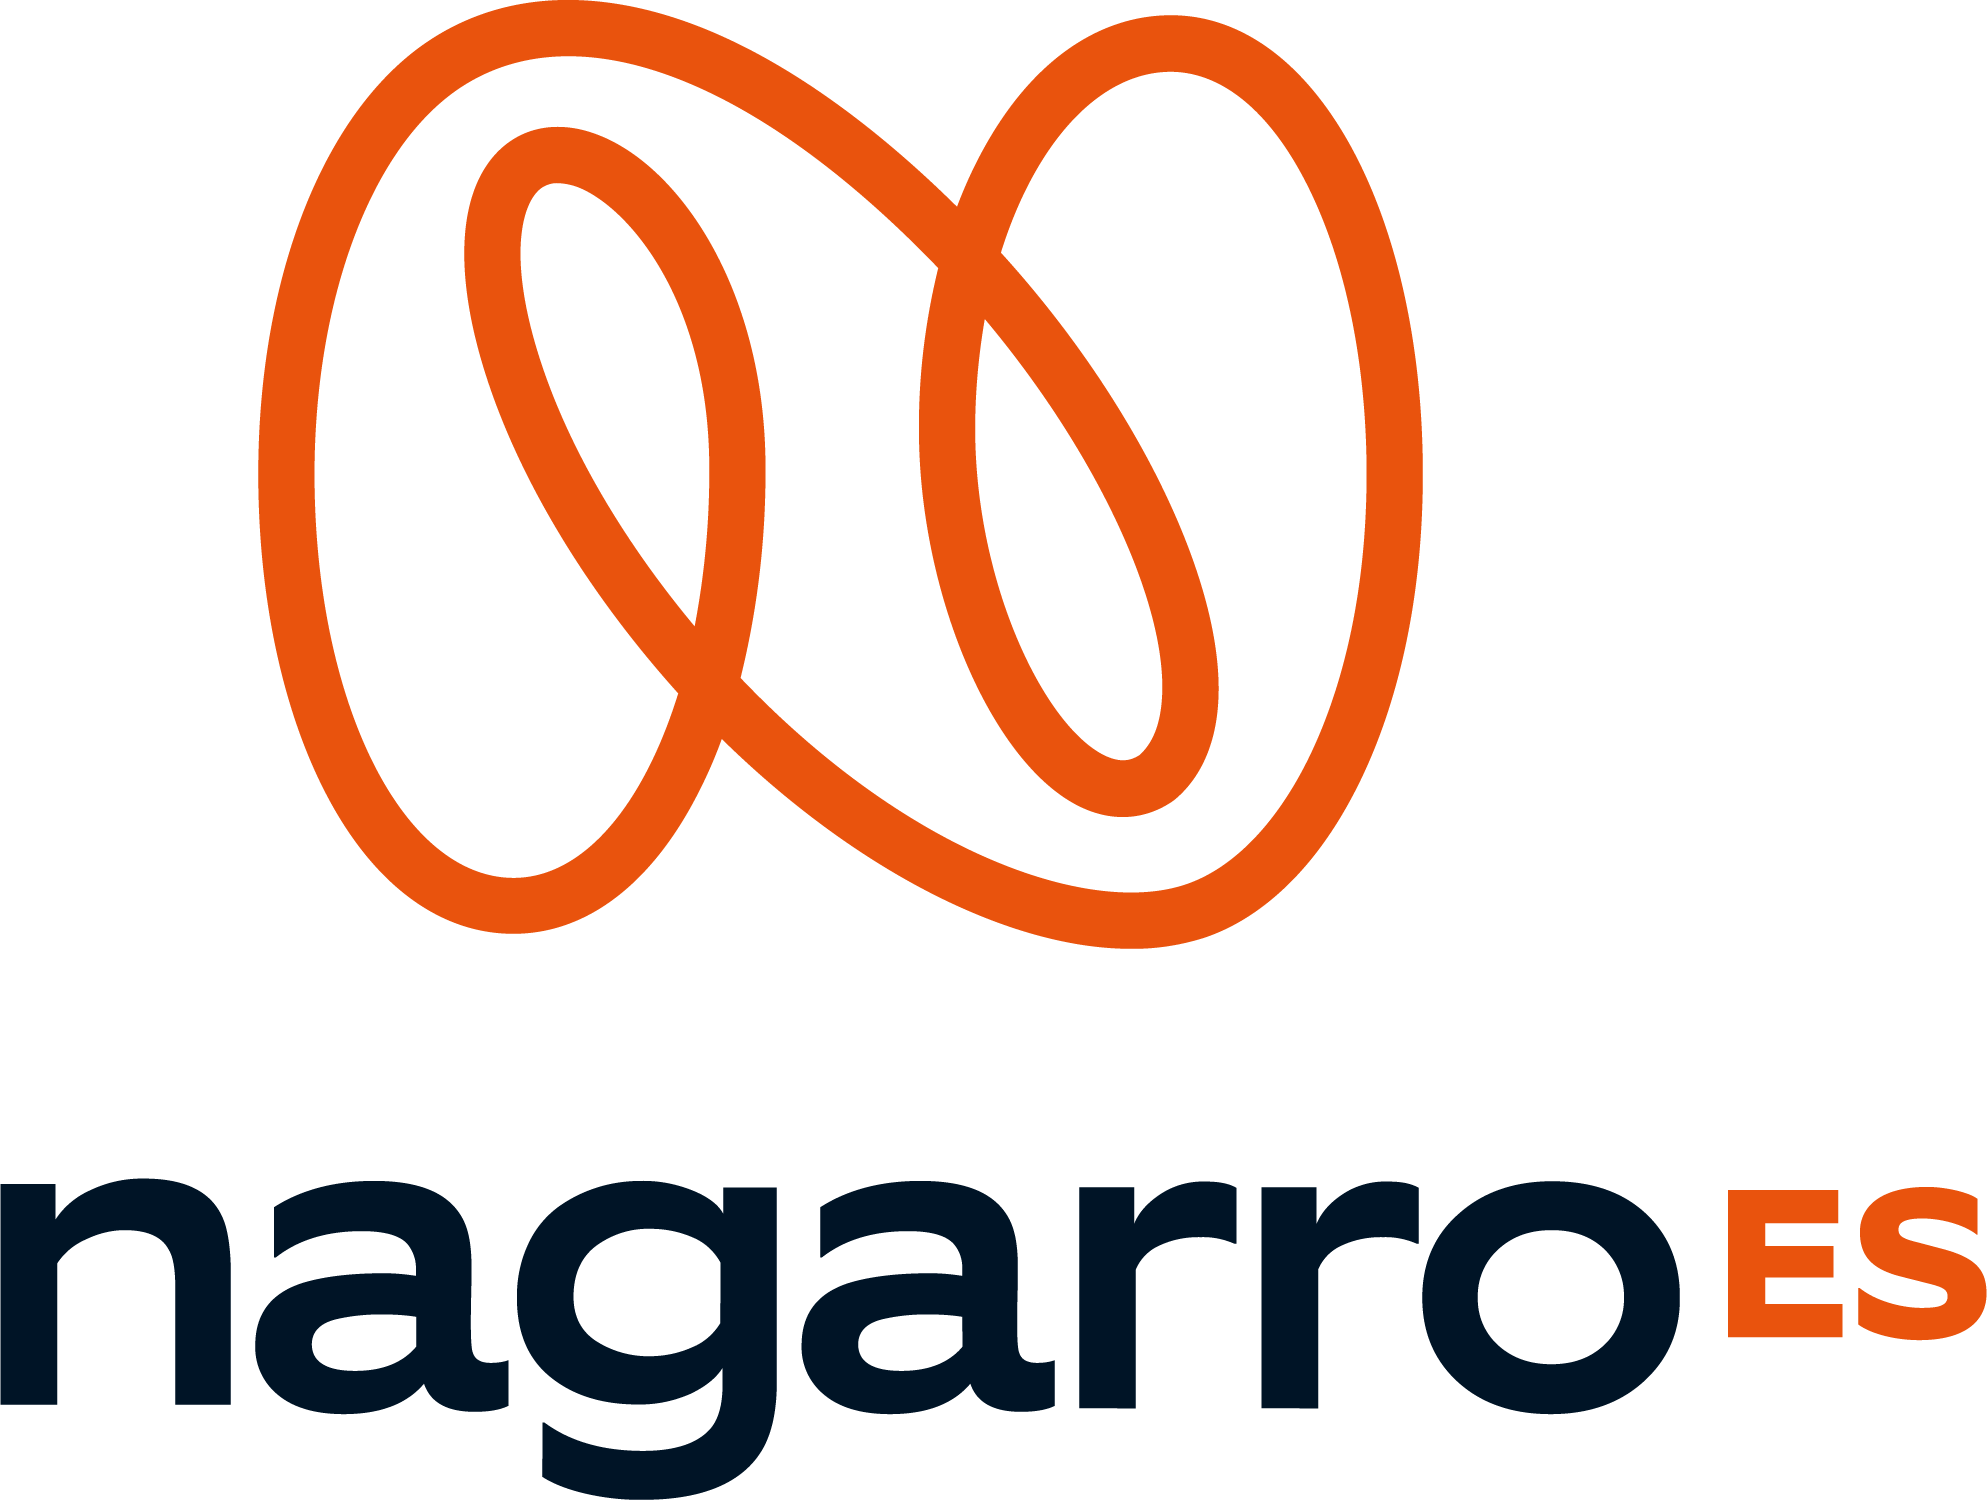 Nagarro achieves 78% show rate for their Global Webinars driving higher  Leads and better Brand Awareness